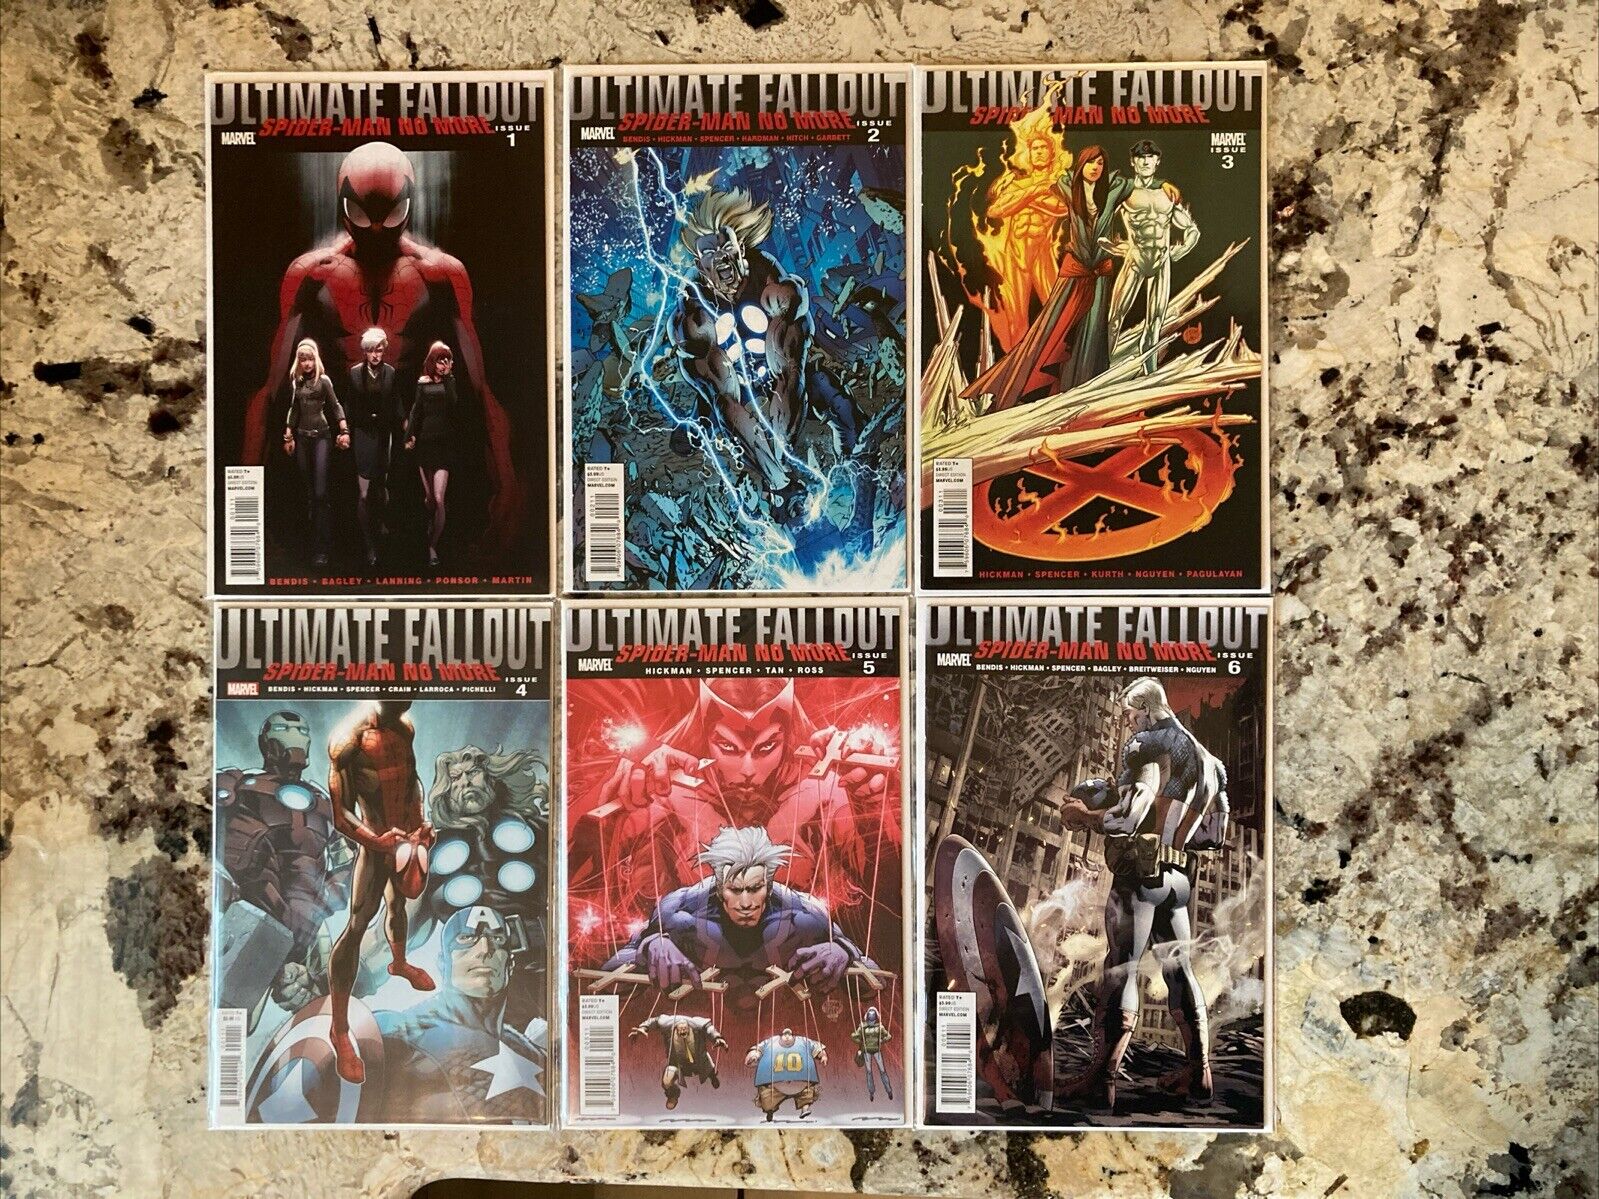 Ultimate Fallout 1 2 3 4 5 6 1st Miles Morales New Spider-Man Complete Run Lot